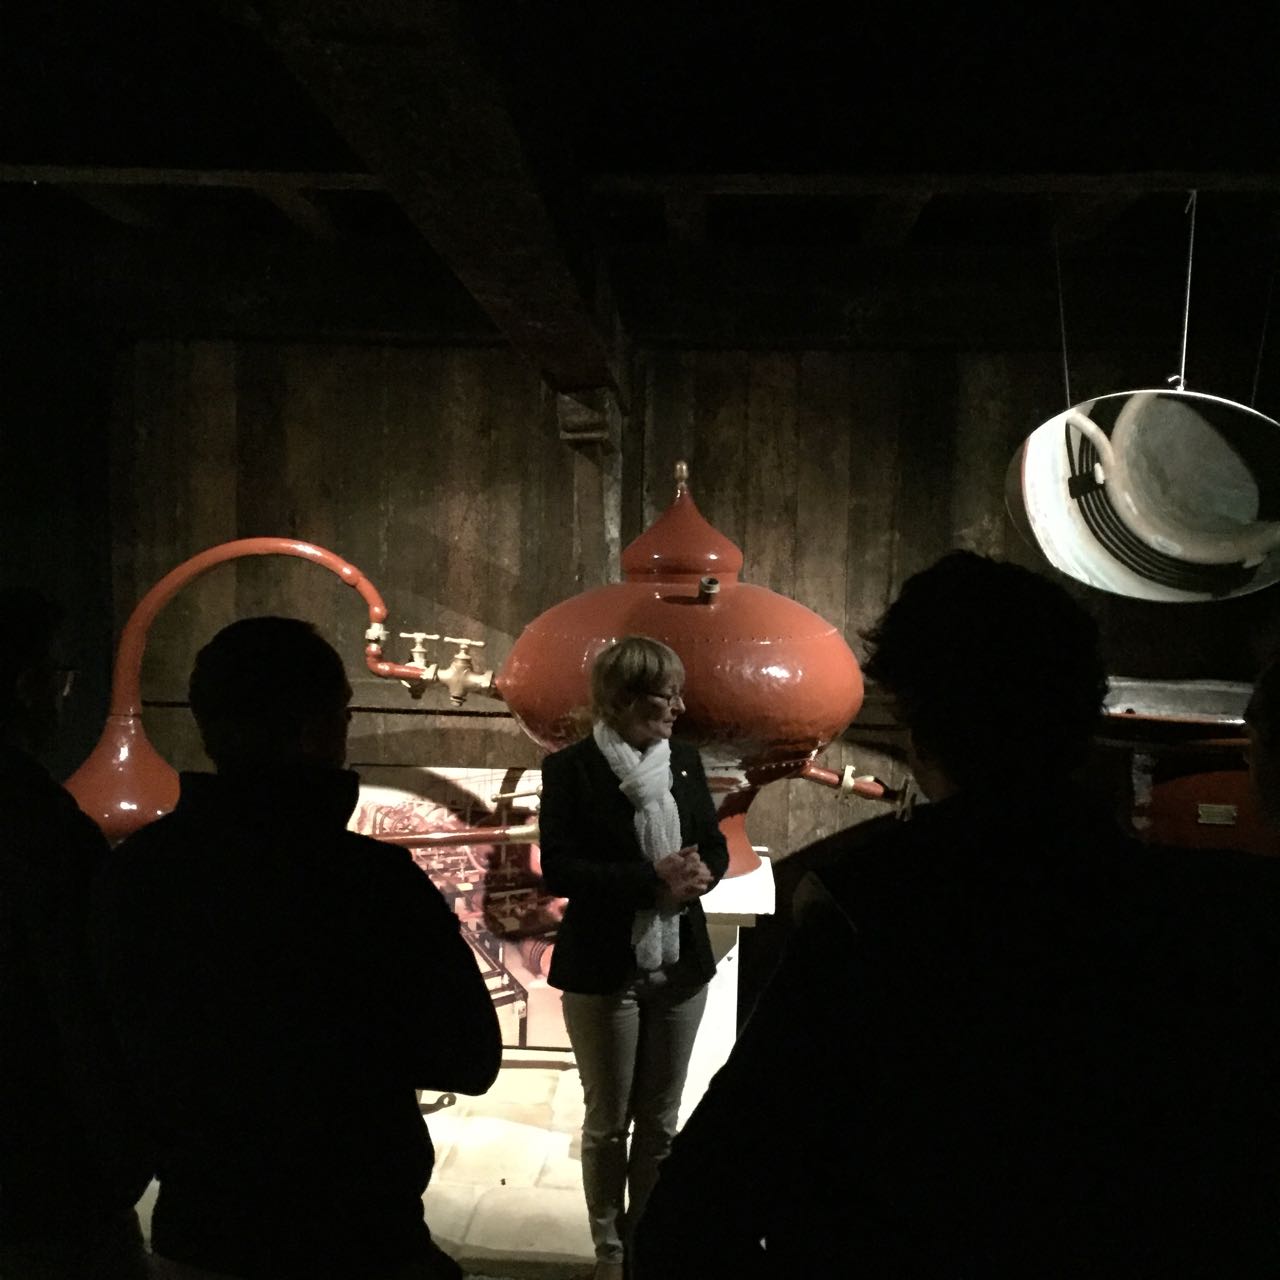 Our Visit to Camus Cognac Or How to Blend Your Own Cognac